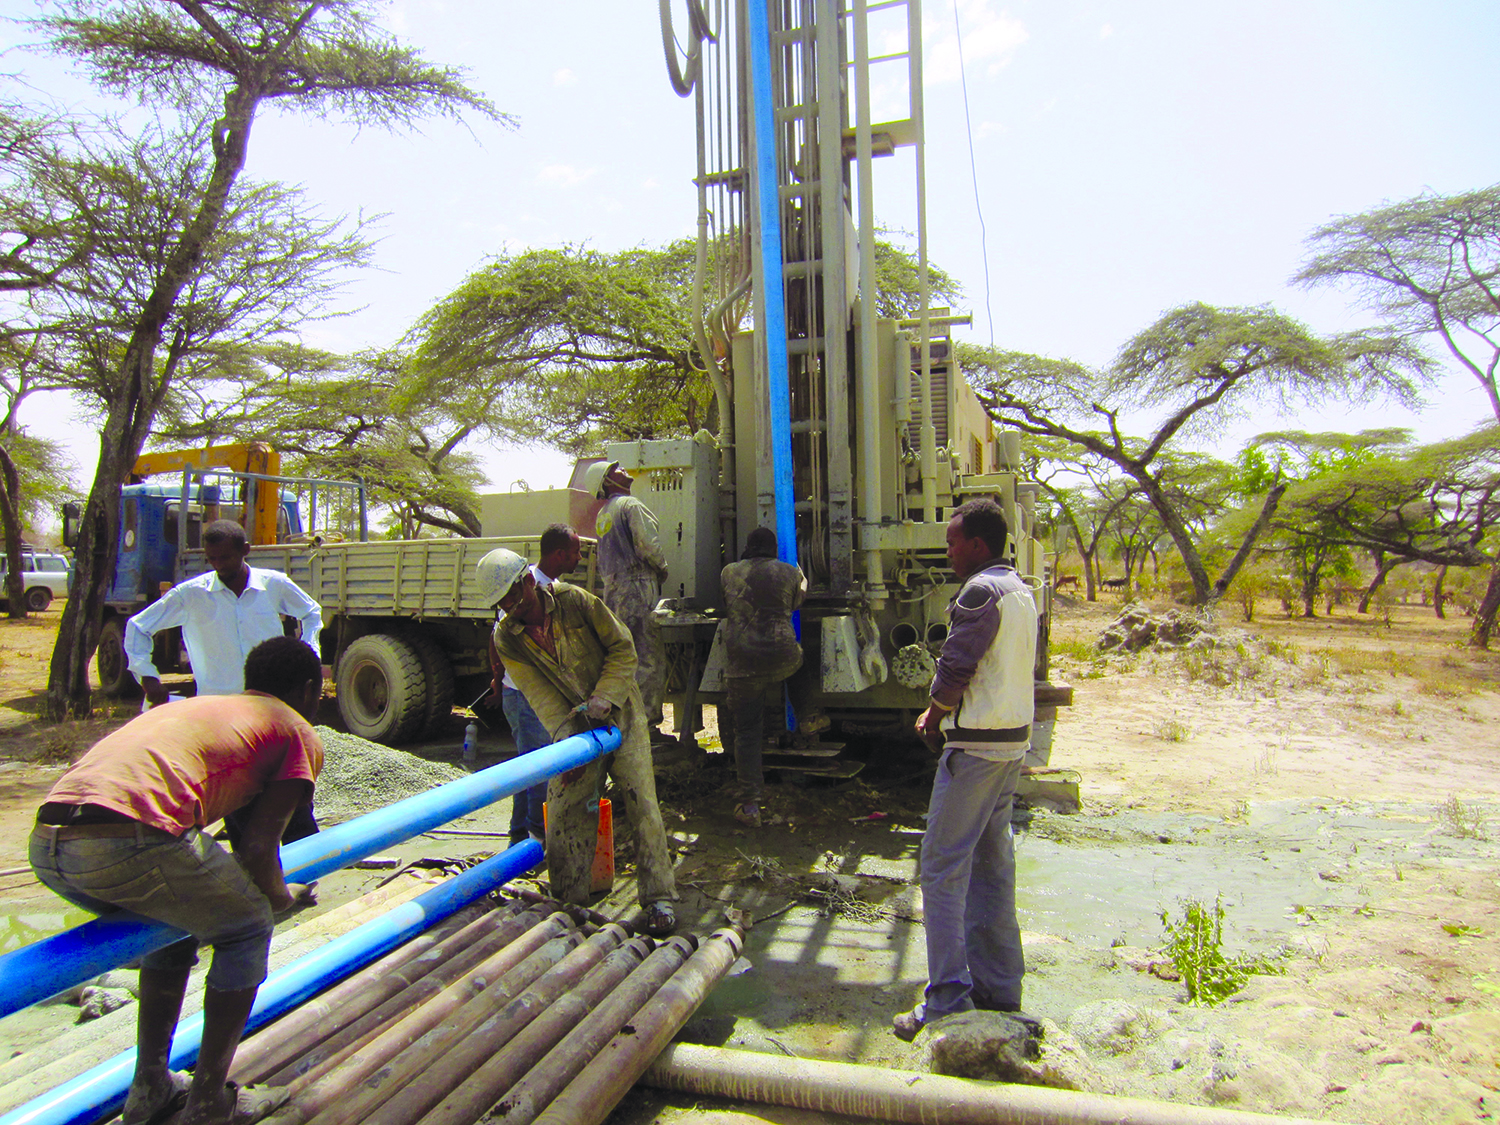 Workers drill for water in Africa, where Johns Creek Baptist Church of Alpharetta, Ga., is heavily involved in healthy water ministries. (Photo/CBF)